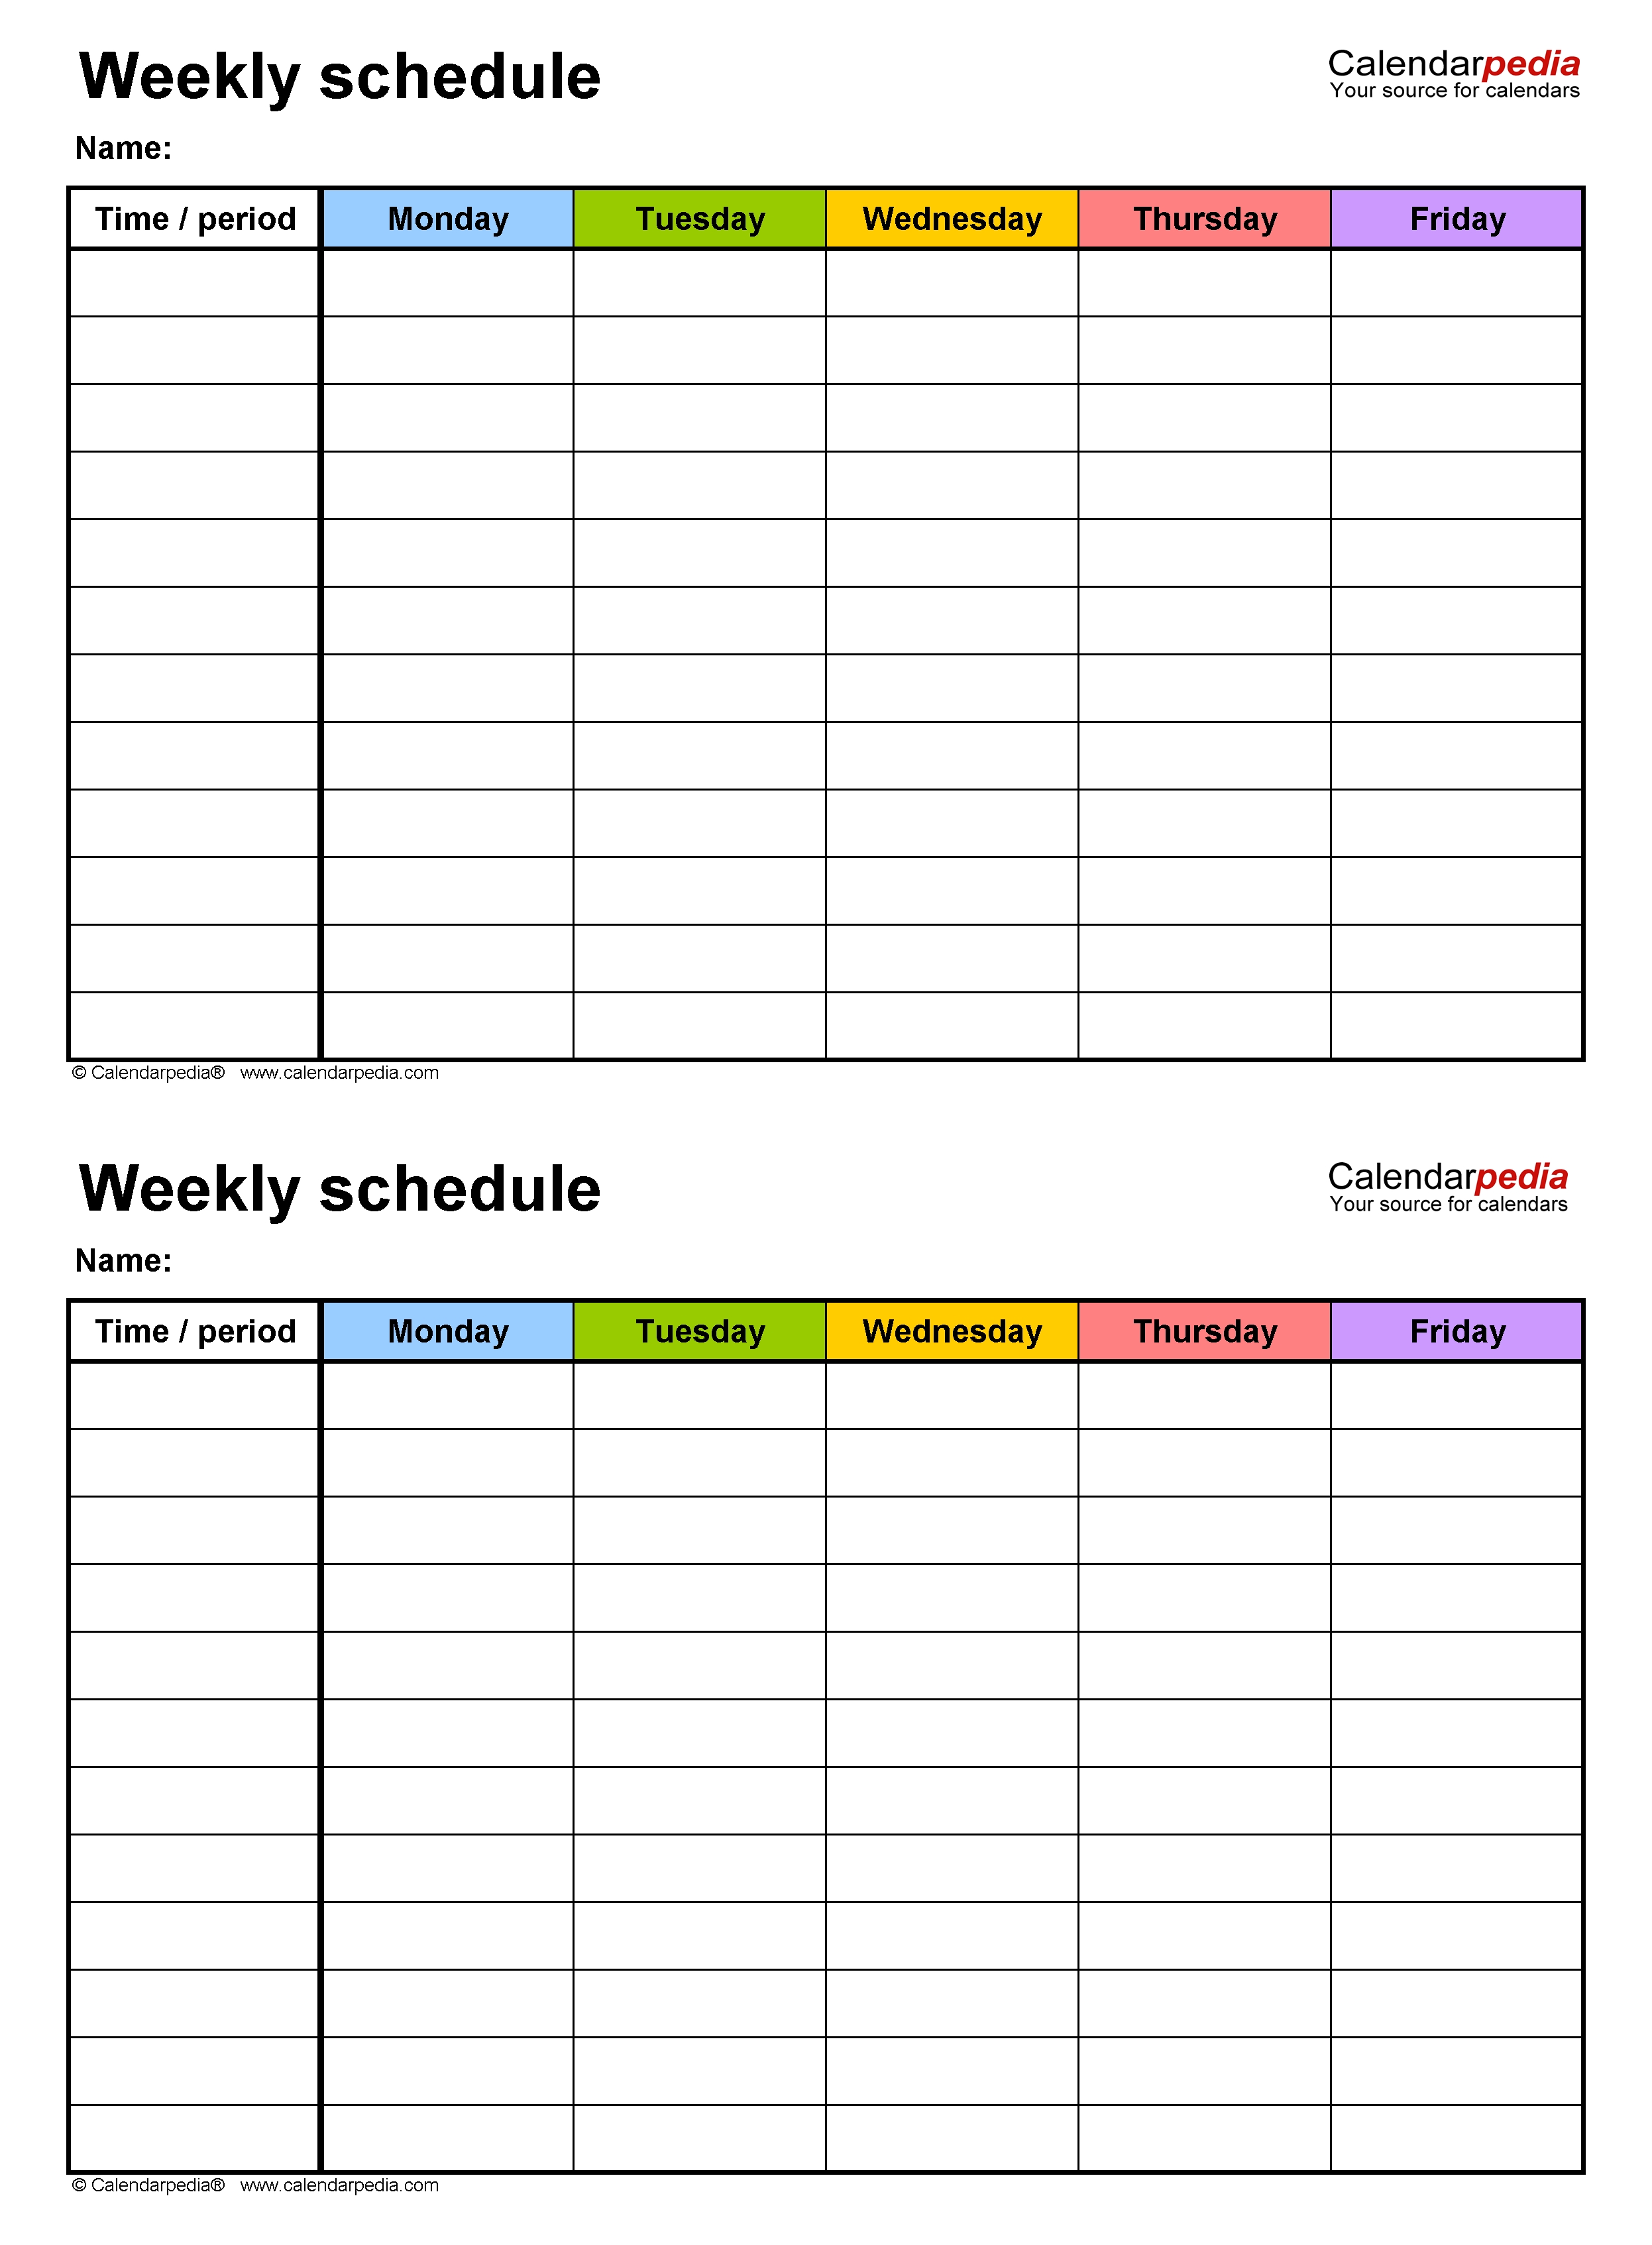 Free Weekly Schedule Templates For Word - 18 Templates-Monday To Friday Word Template